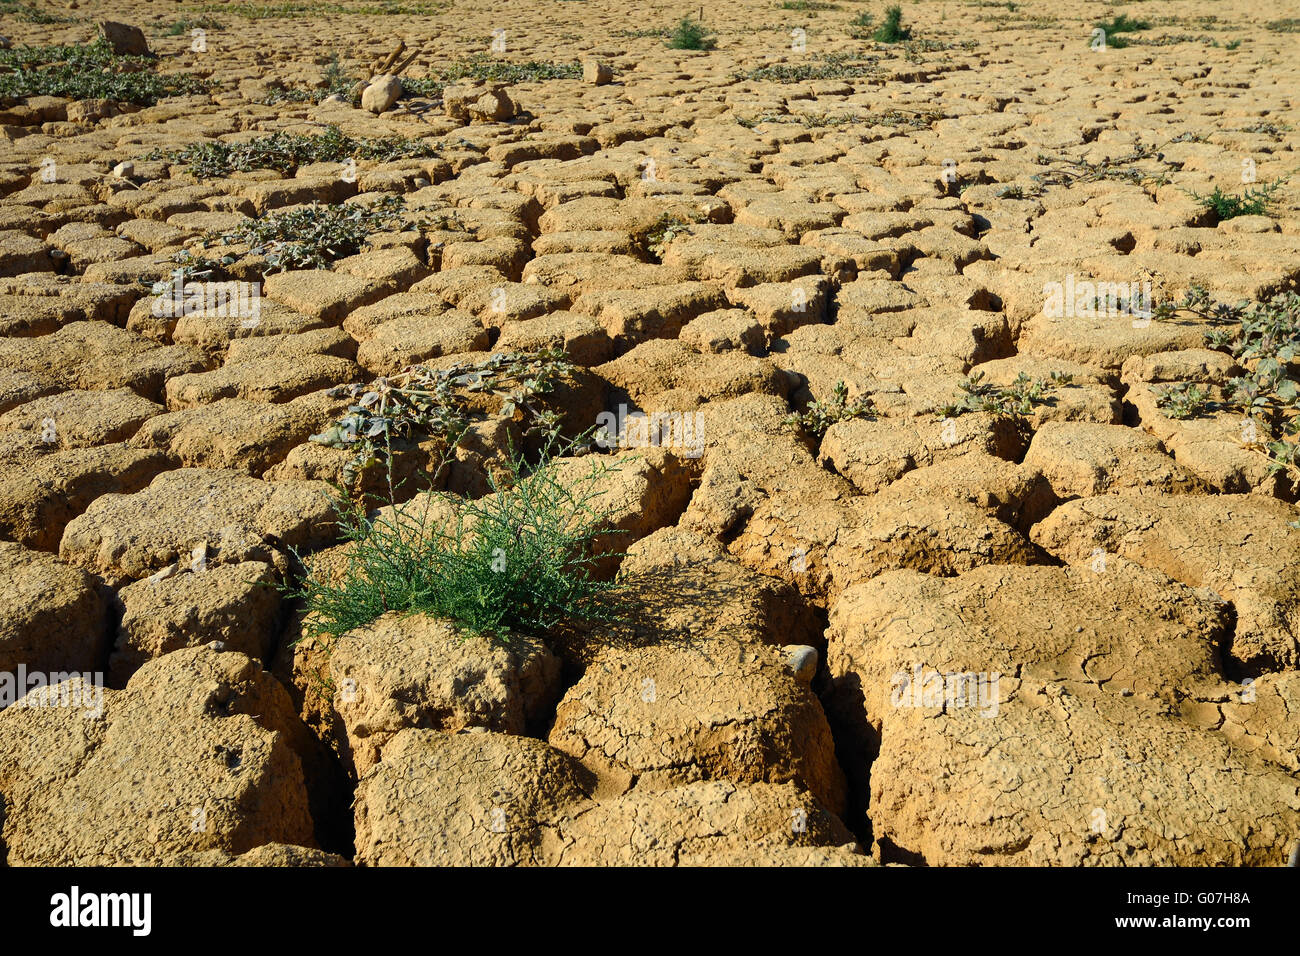 Dry cracked ground and green plants. Taken in Negev Stock Photo